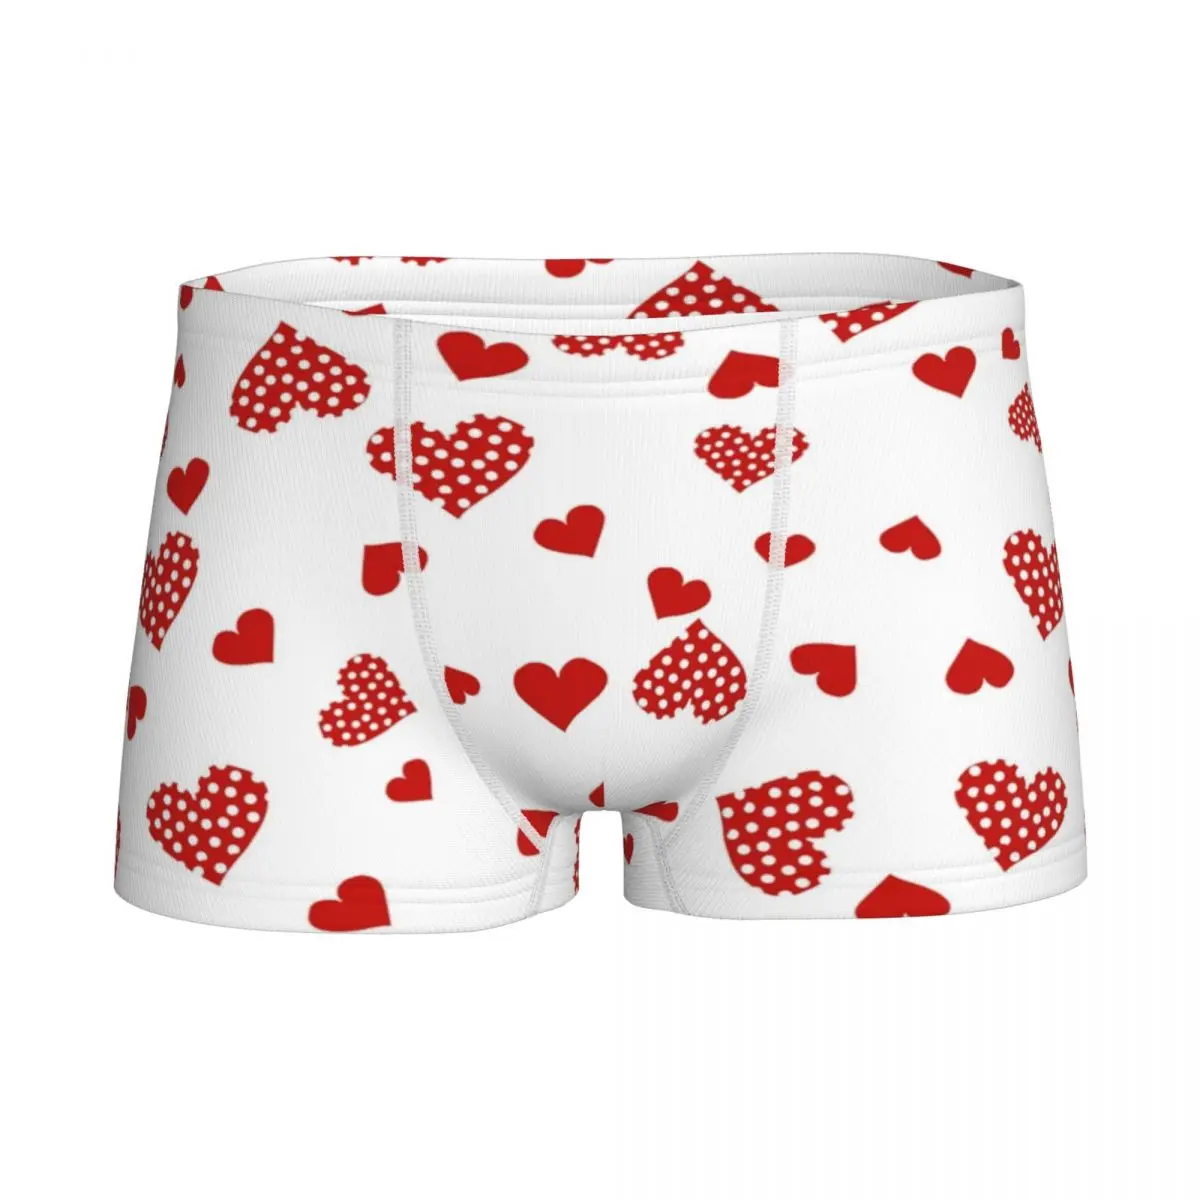 

Boys Valentines Hearts Boxer Shorts Cotton Young Soft Underwear Children's Shorts Panties Pop Teenagers Underpants